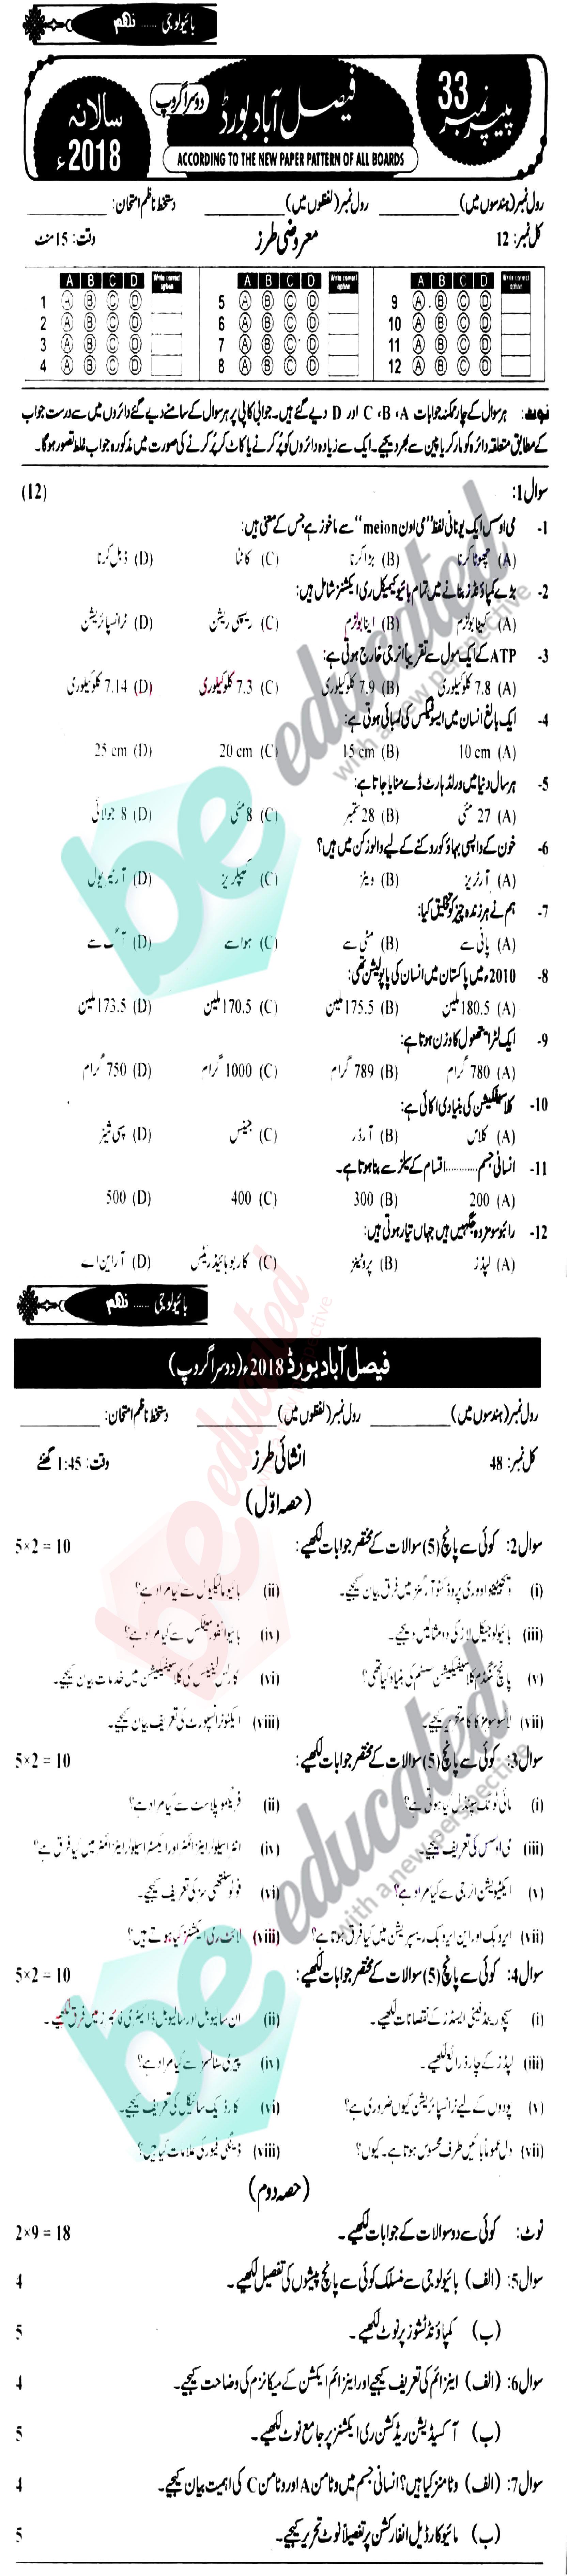 Biology 9th class Past Paper Group 2 BISE Faisalabad 2018